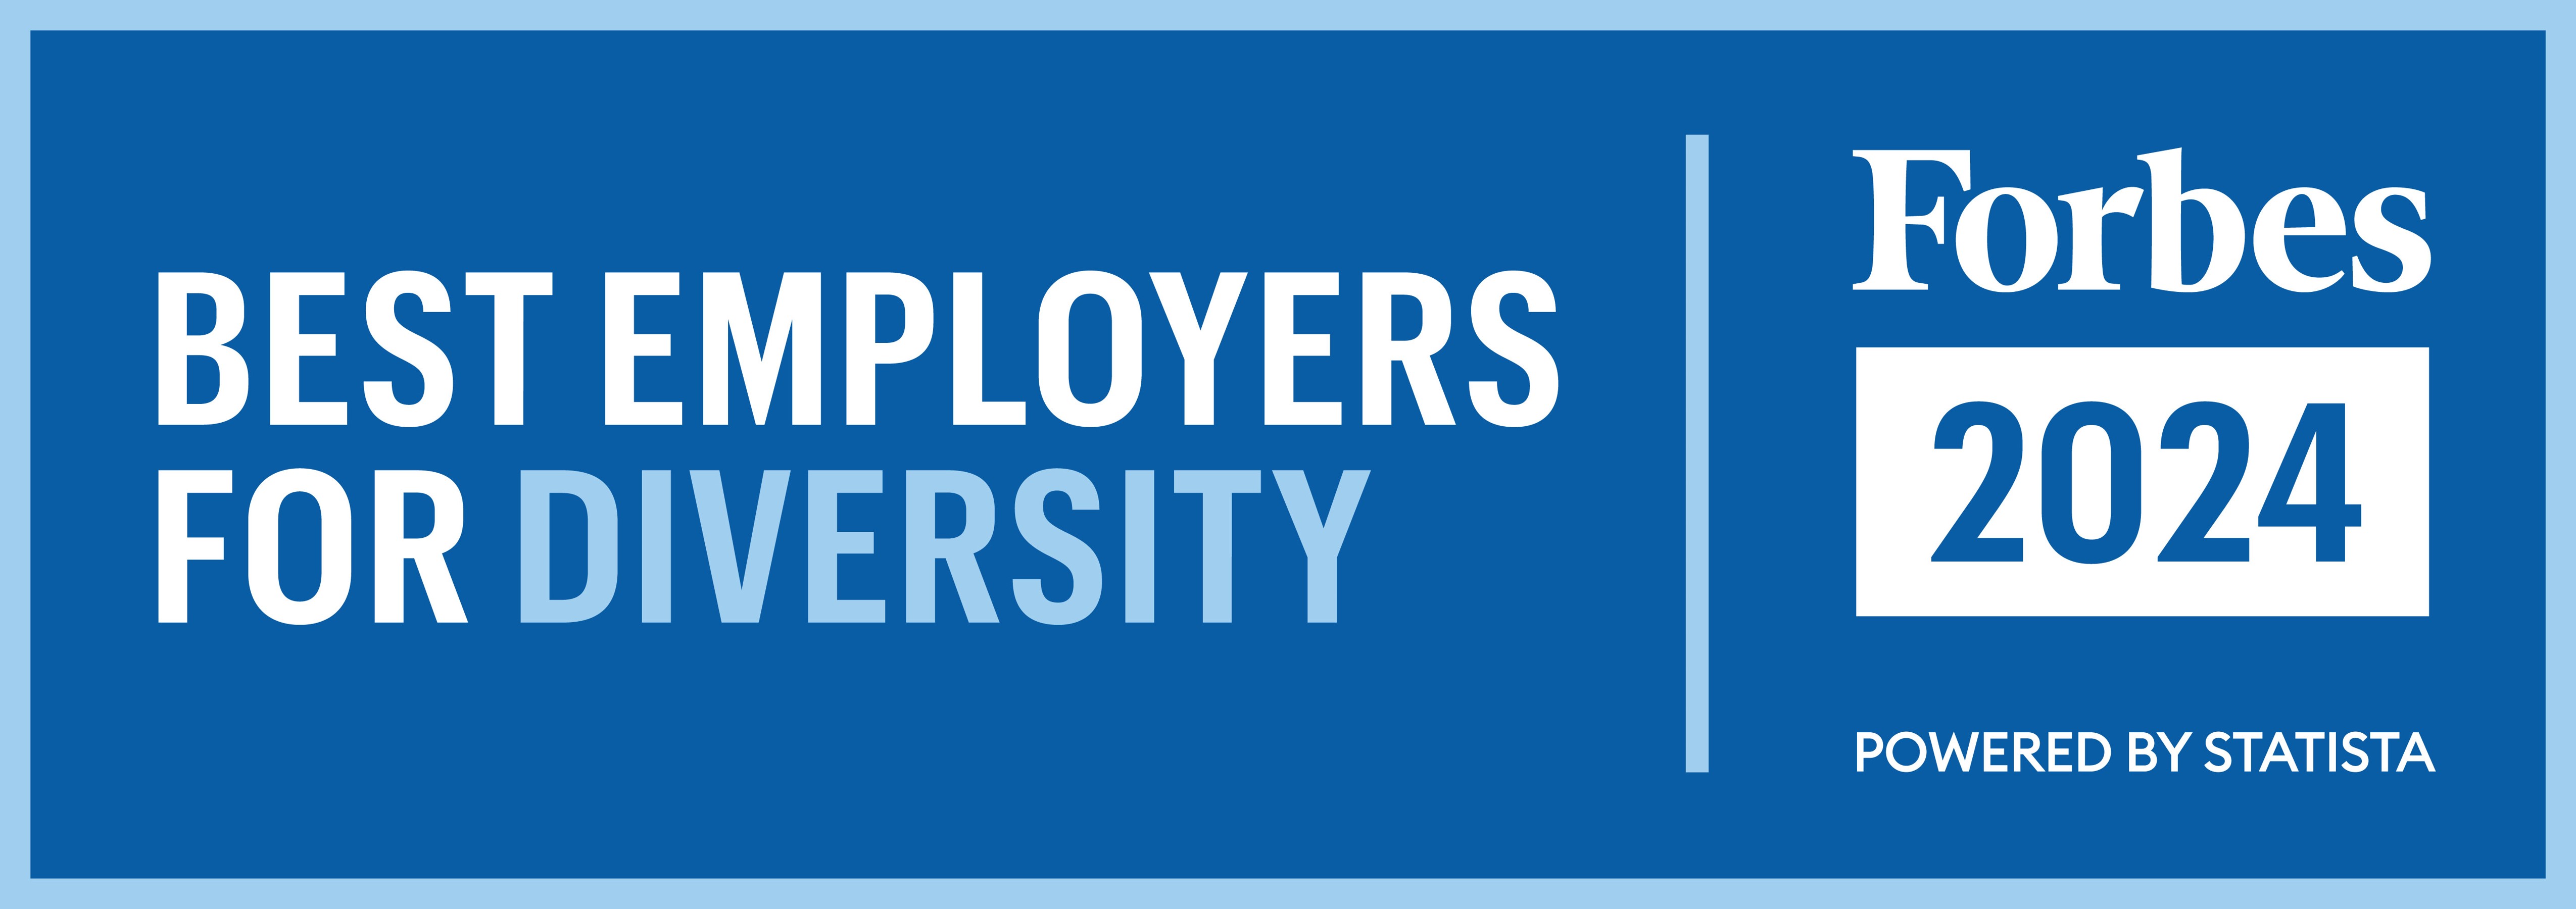 Best Employers for Diversity